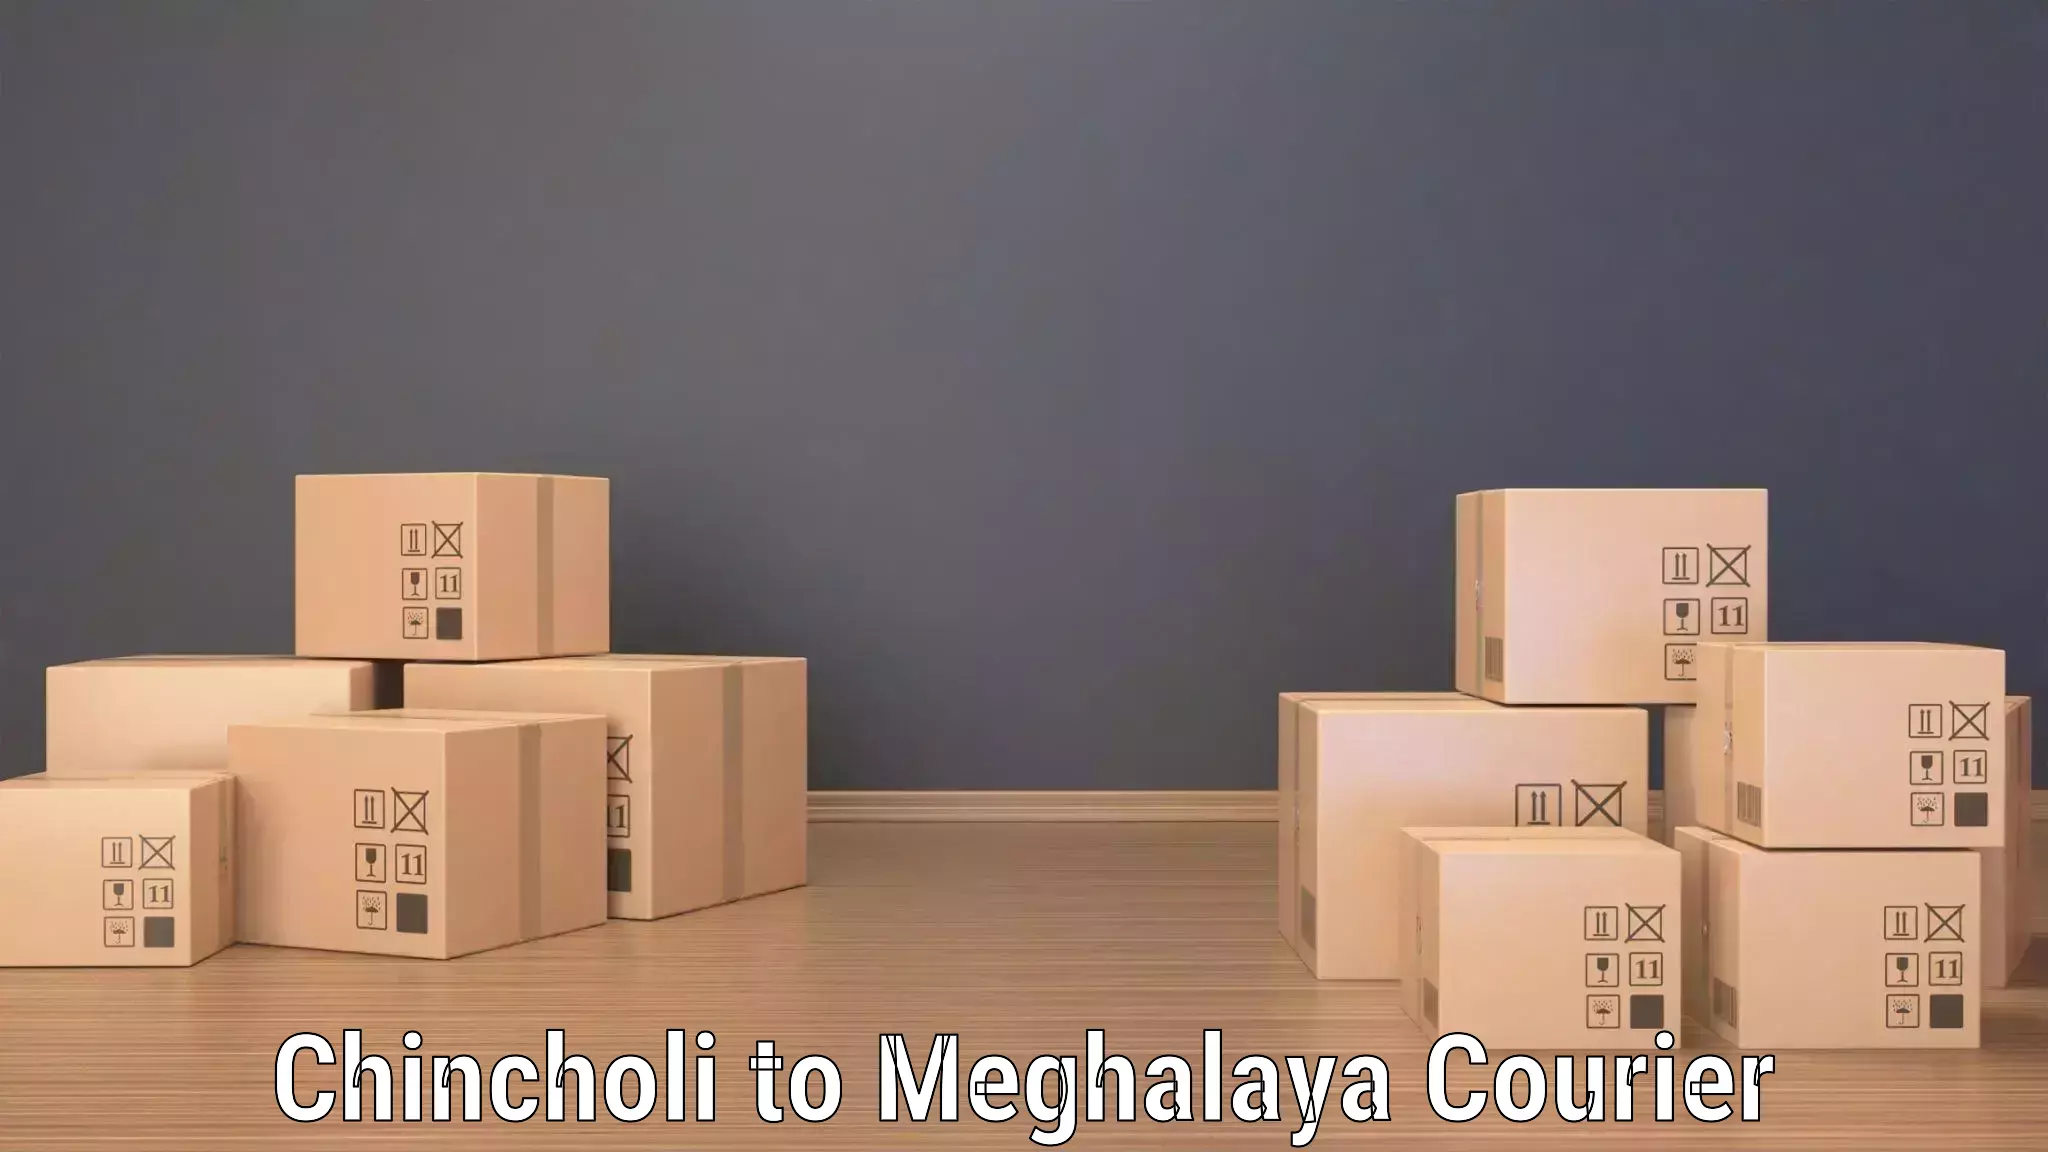 24/7 courier service in Chincholi to Shillong